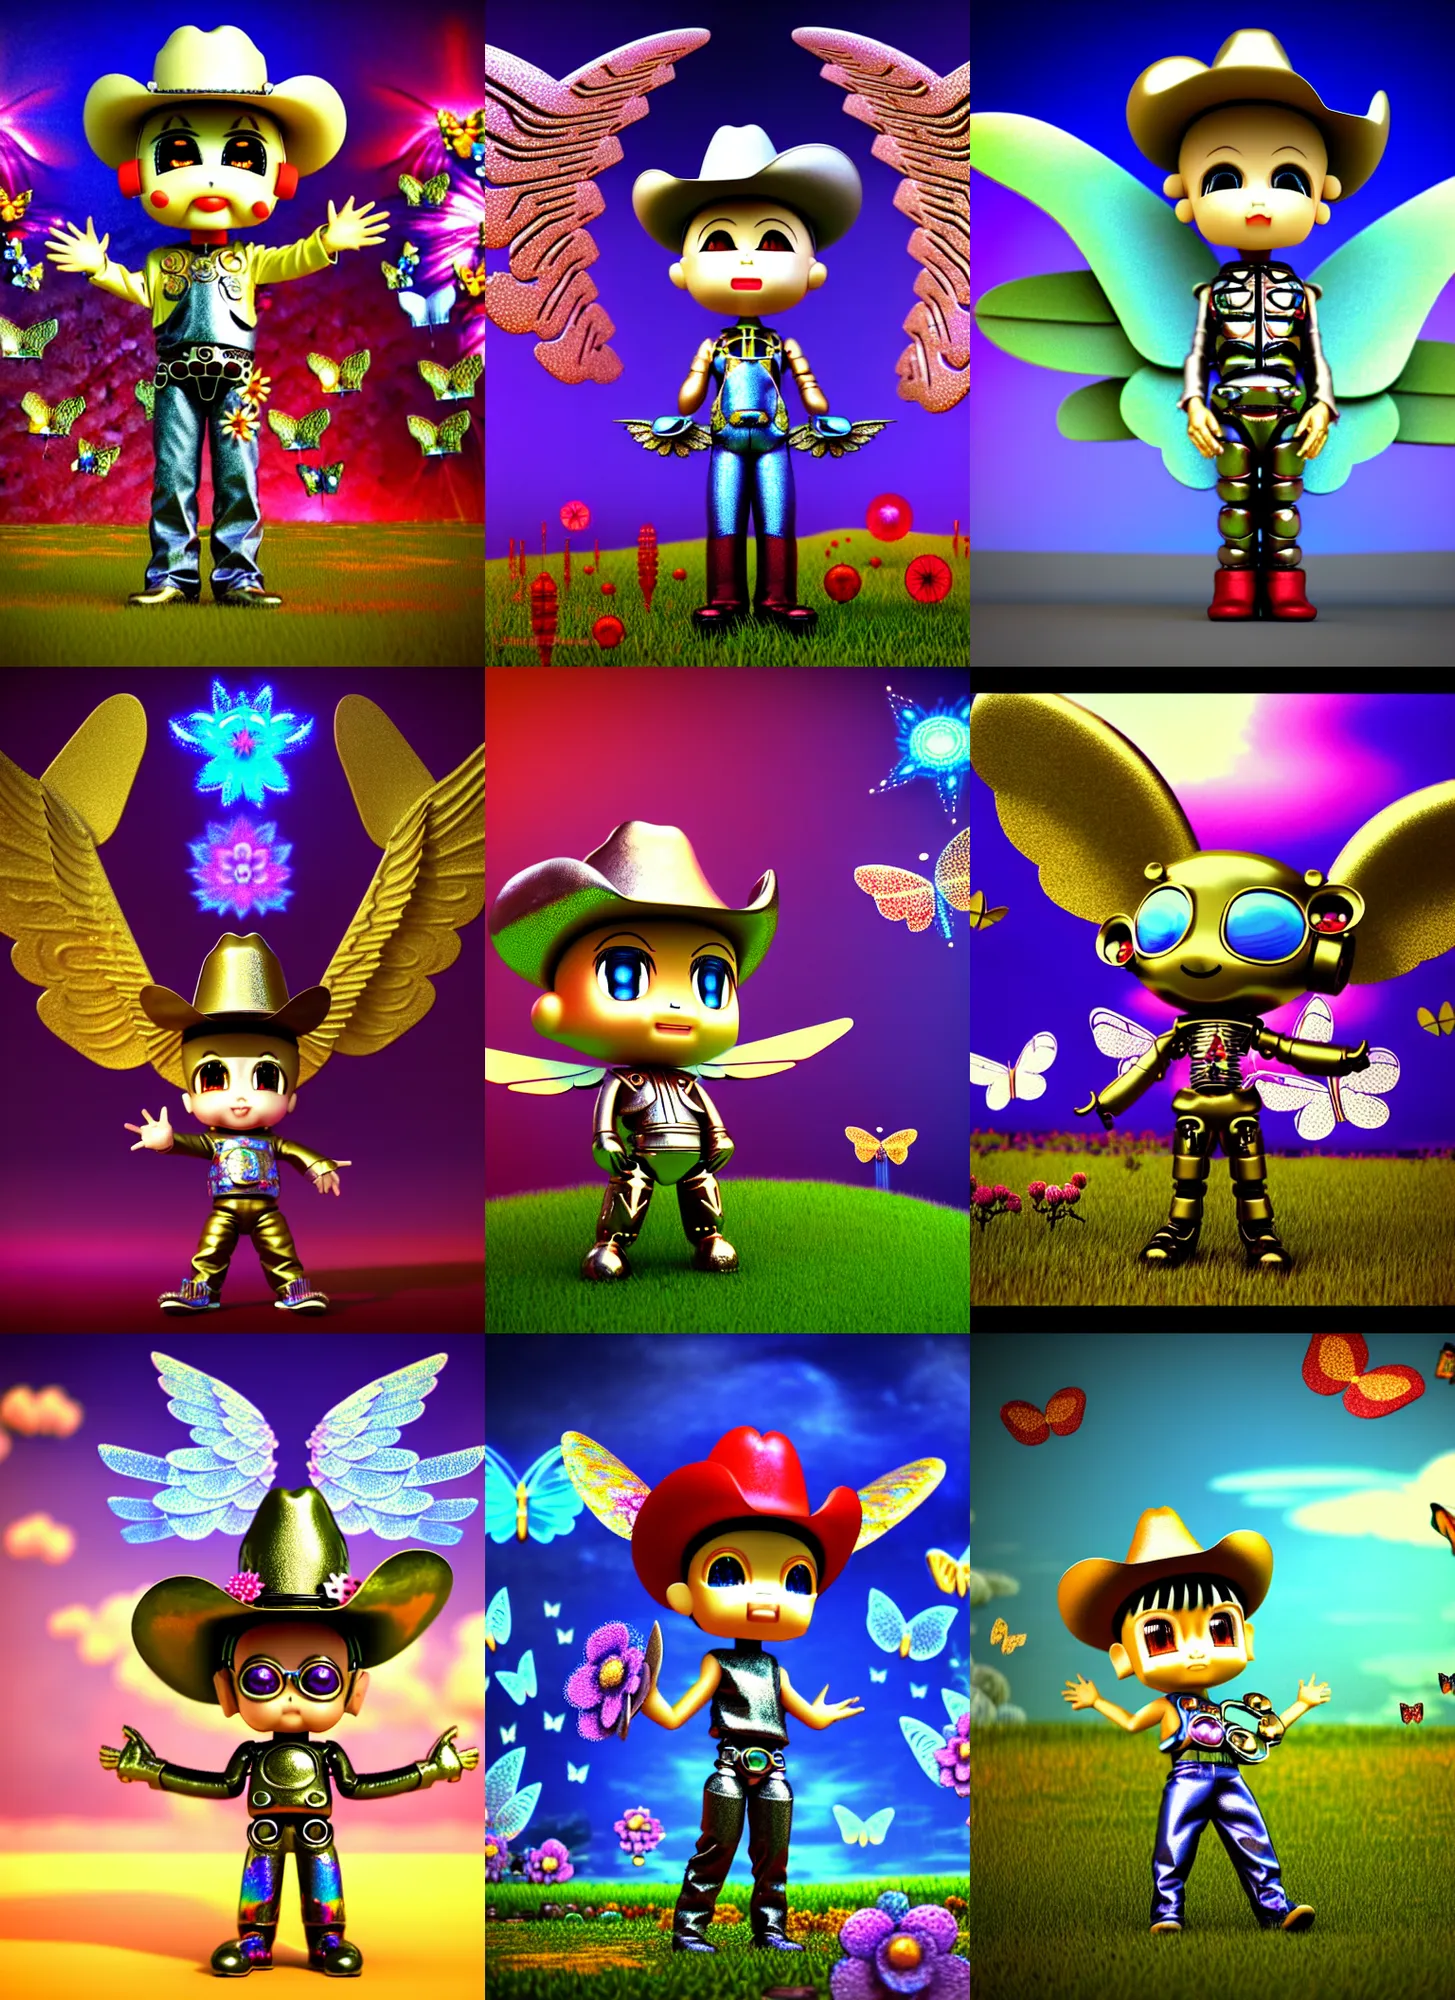 Prompt: vintage cgi 3 d render by ichiro tanida of a chibi cyborg metallic chao チャオgarden wearing angel wings and a cowboy hat, standing in a big psychedelic landscape background filled with 3 d butterflies and 3 d flowers n the style of micha klein, old cgi 3 d rendered bryce 3 d, wide frontal view